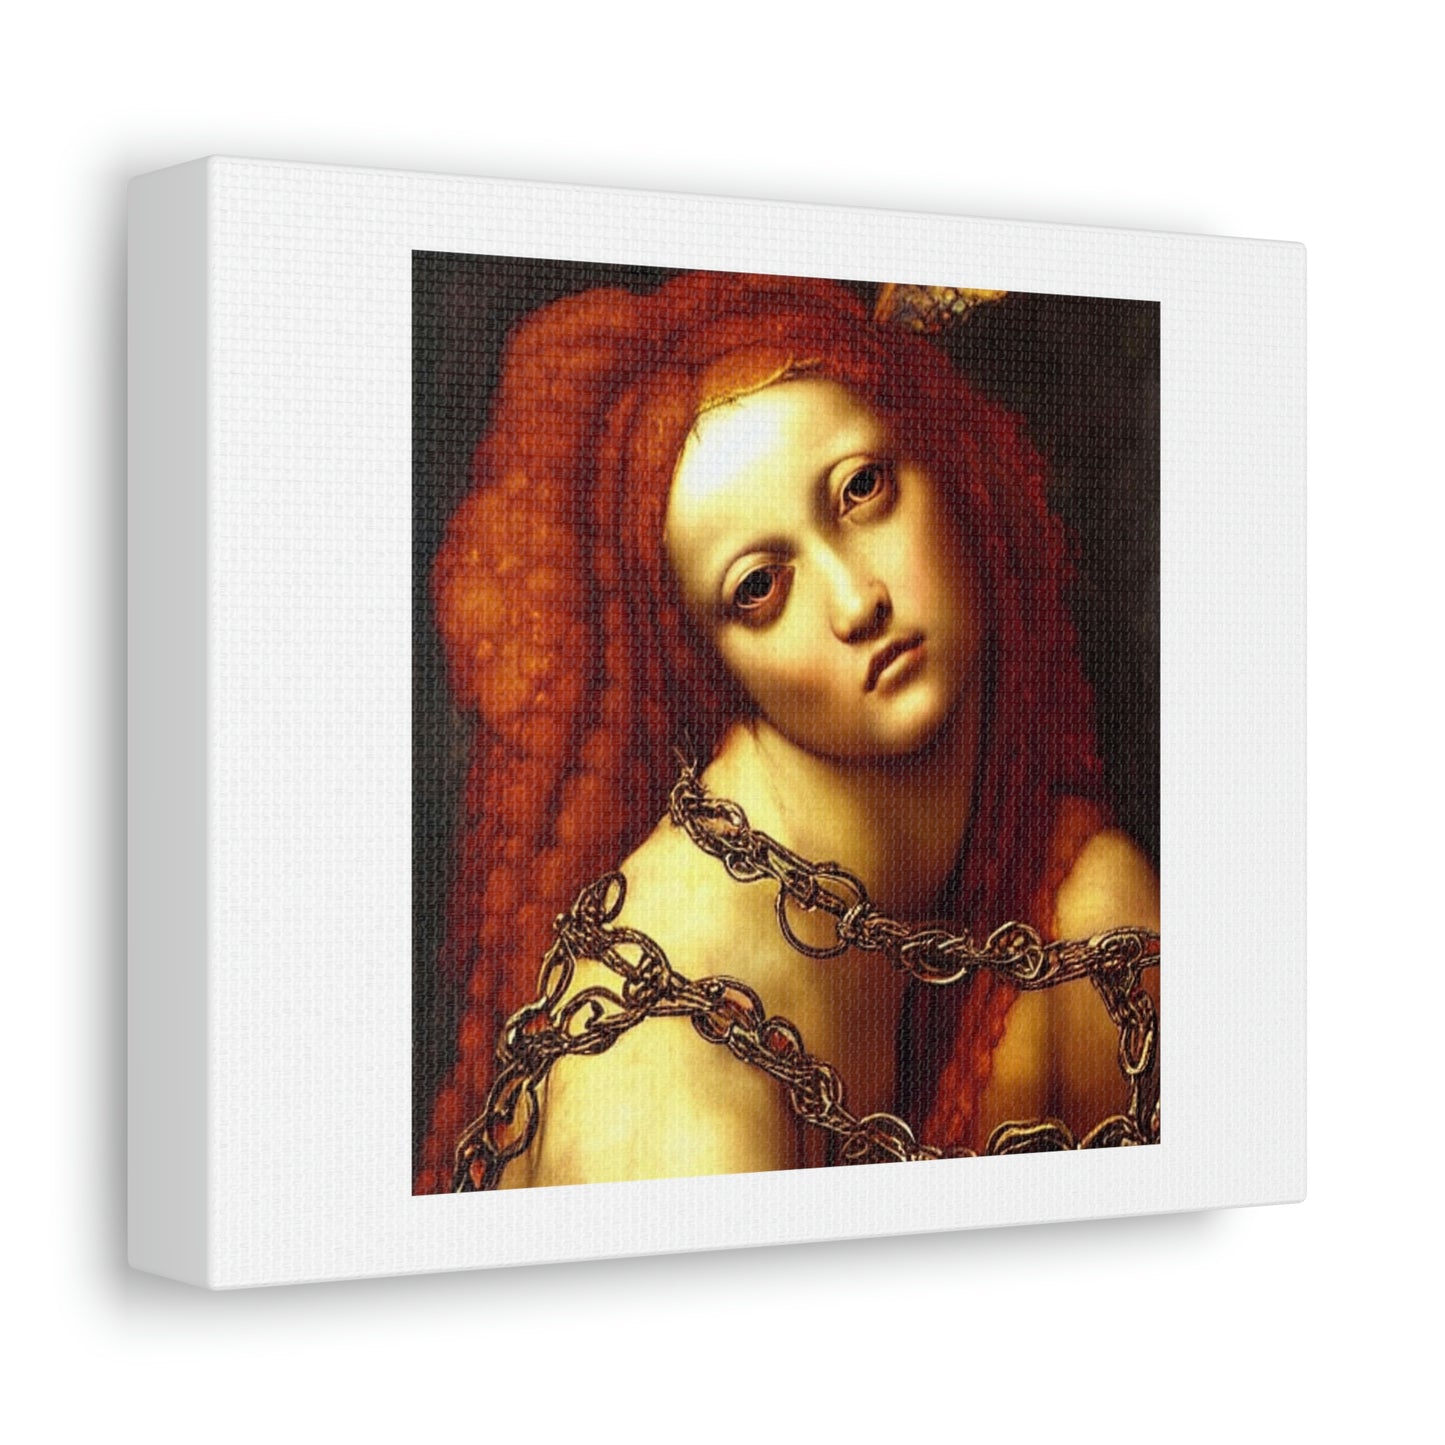 Fairy Nymph Bound In Chains Standing In Flames Art Canvas 'Designed by AI'